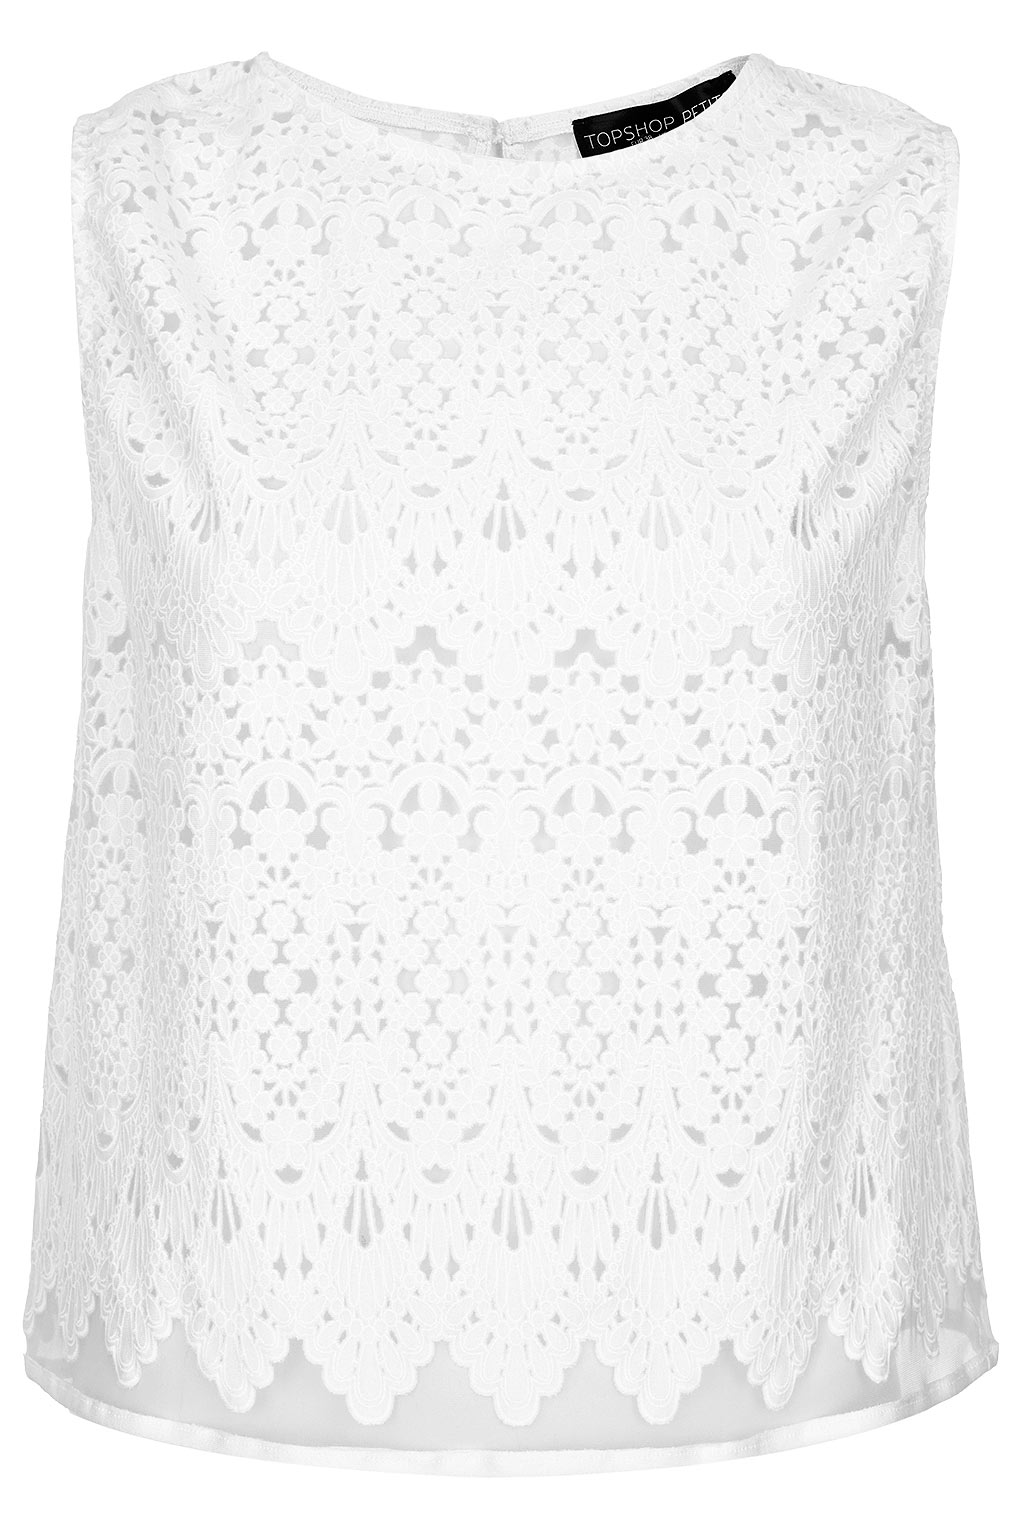 Lyst - Topshop Floral Lace Burn-Out Top in White